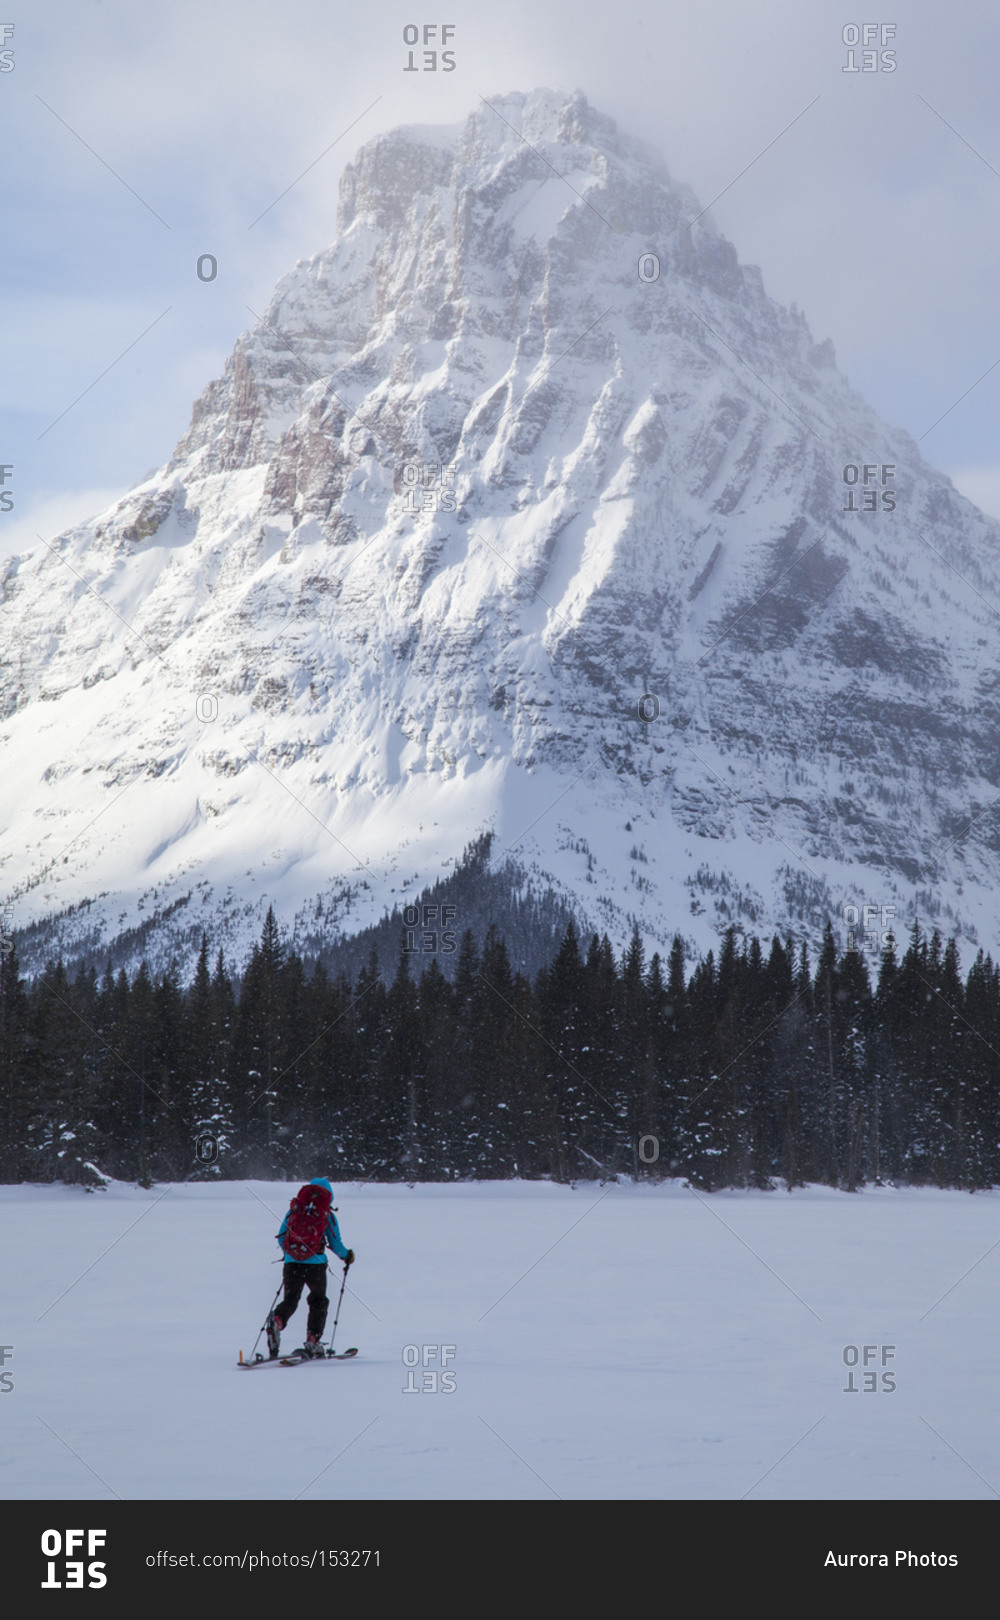 A woman skiing on Two Medicine Lake in front of Sinopah Mountain in Glacier National Park, Montana